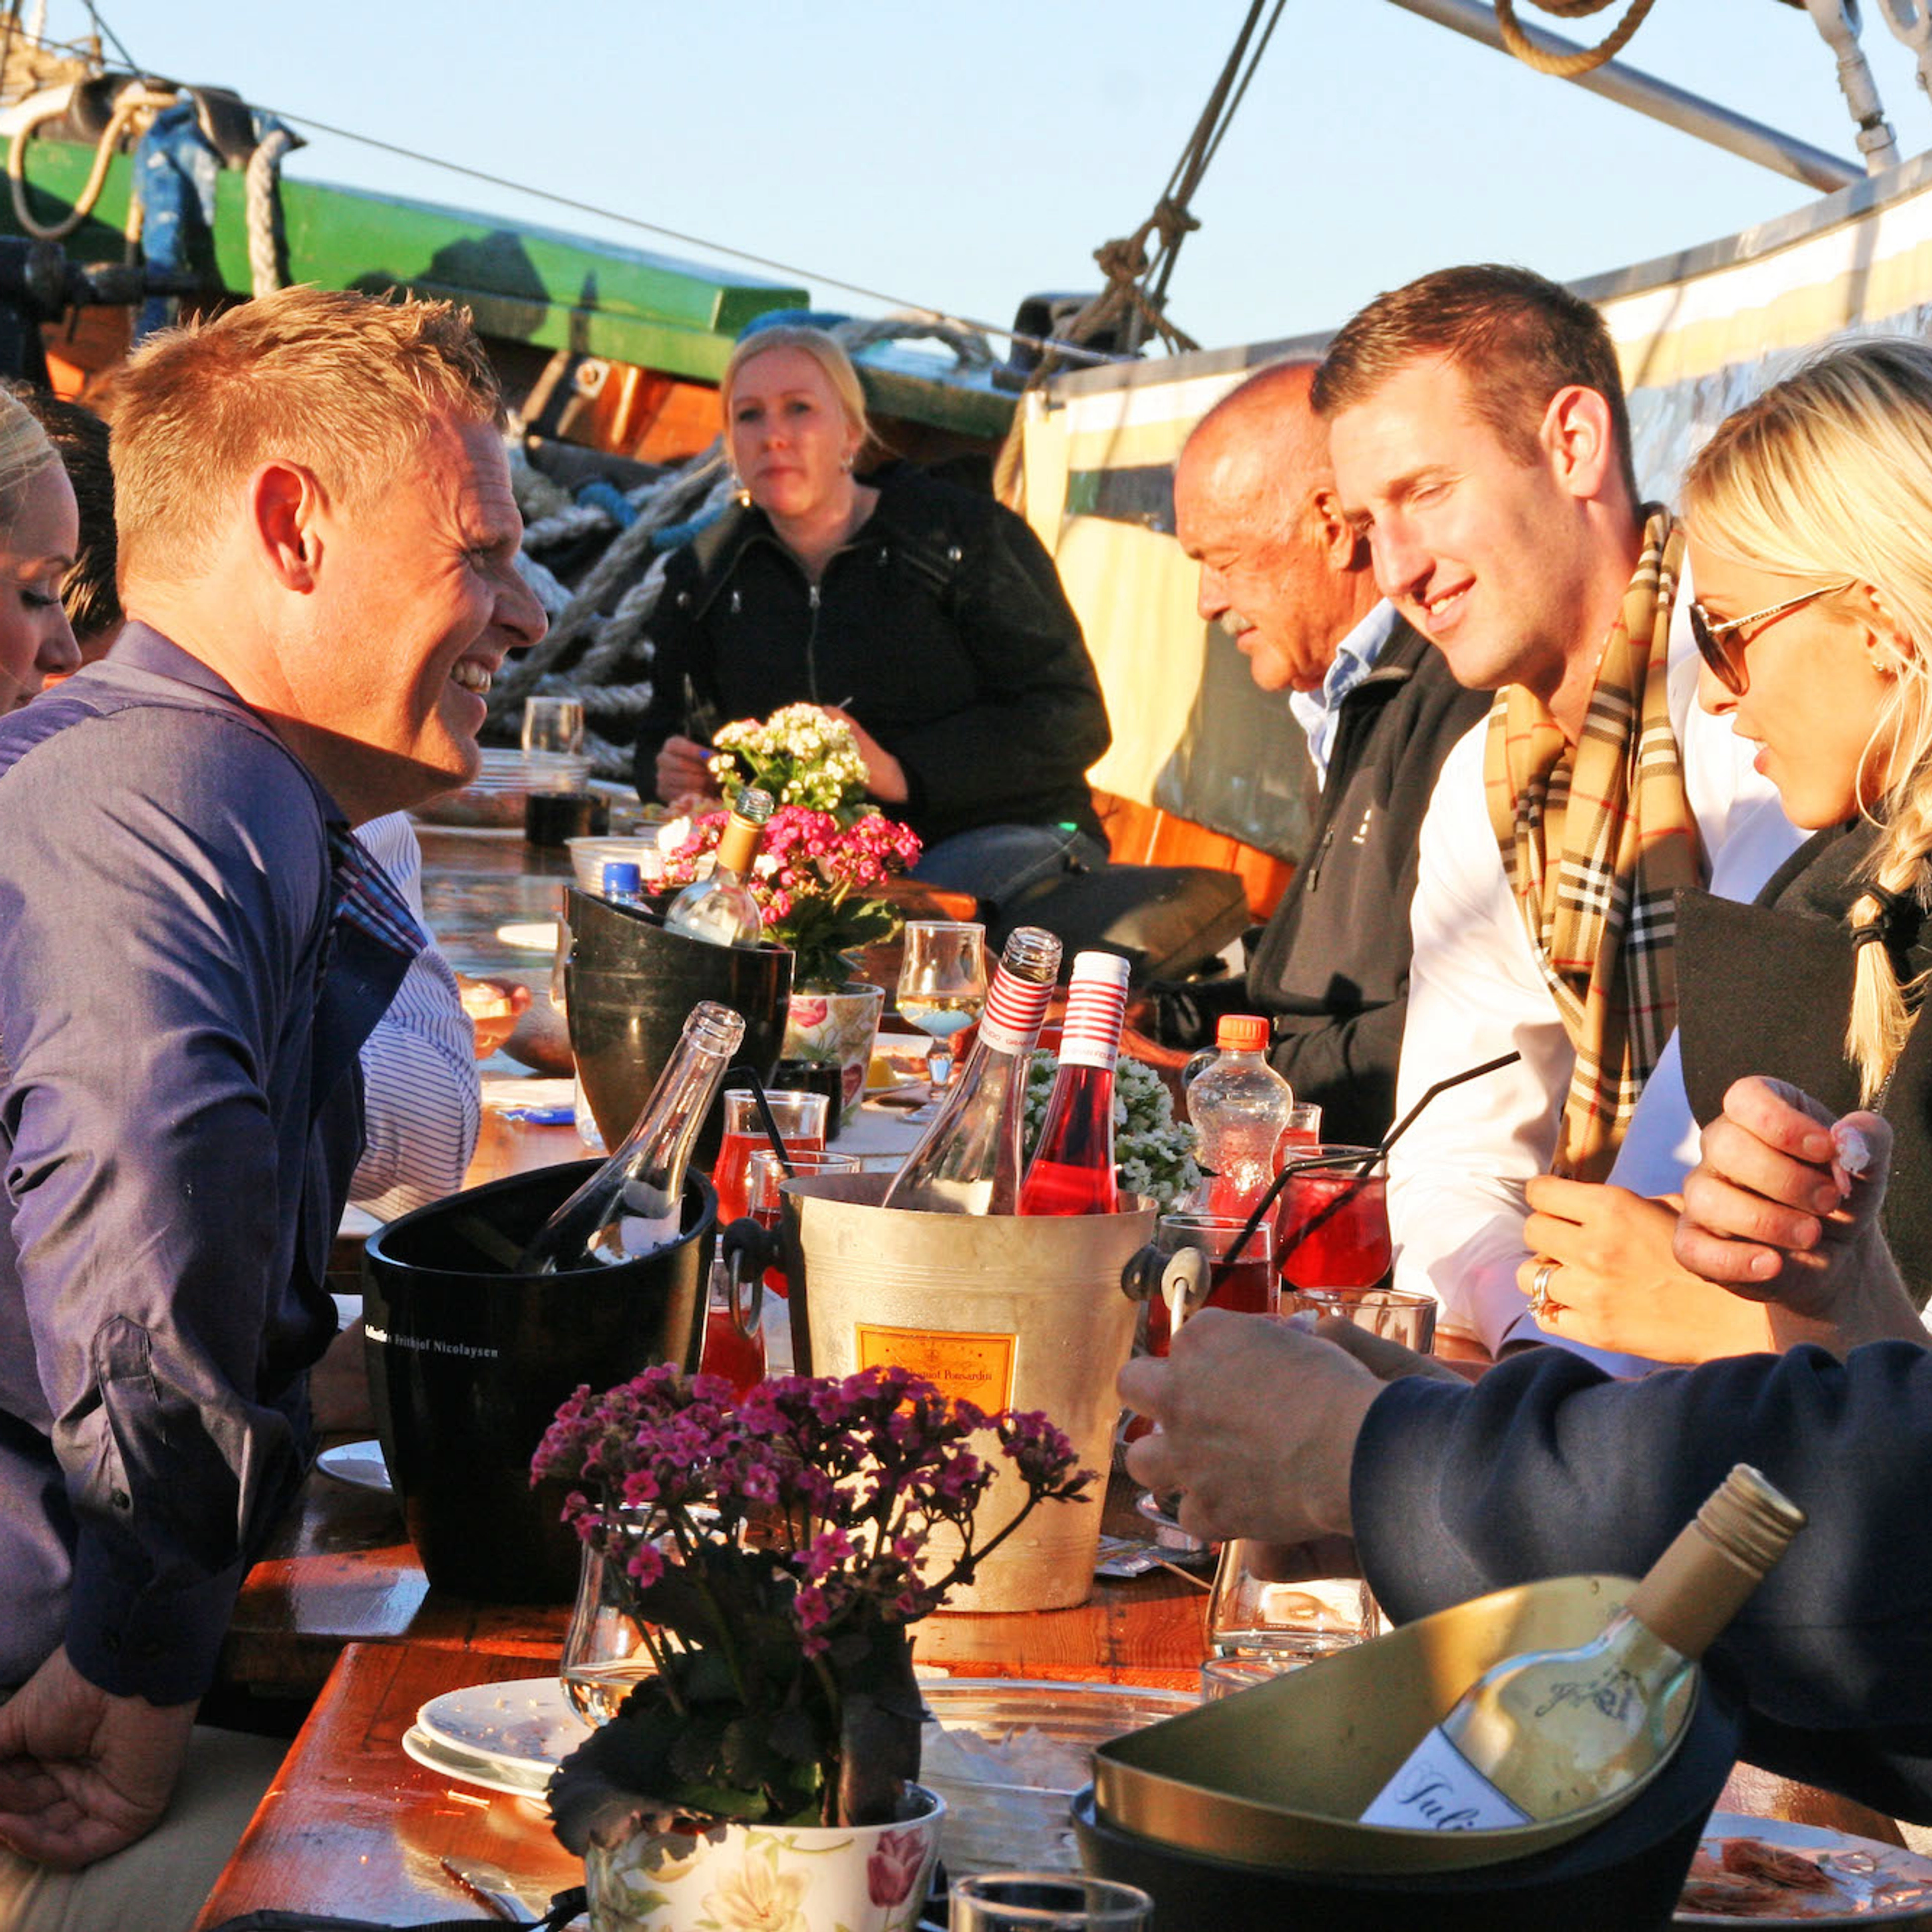 Dinner with friends  - A summer evening on  the Oslofjord - Oslo, Norway